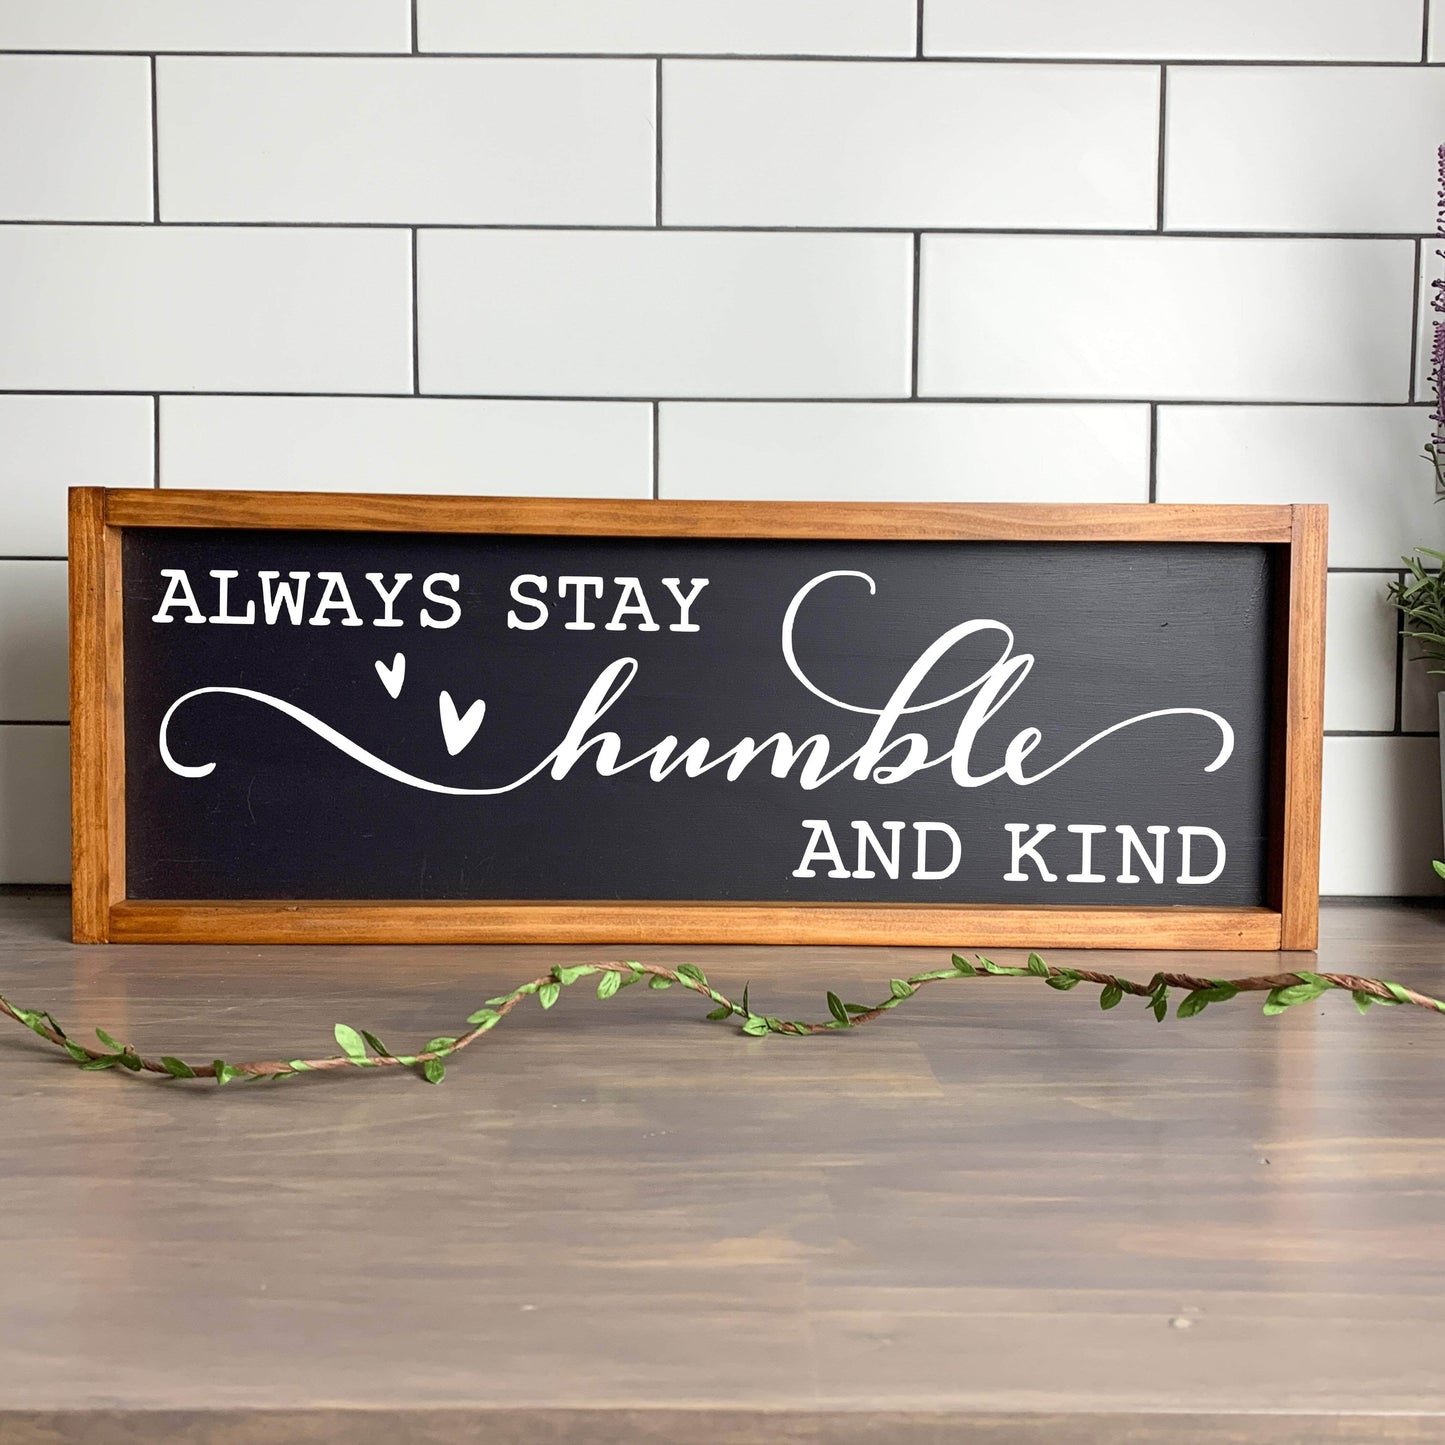 Always stay humble and kind framed wood sign, farmhouse sign, rustic decor, home decor